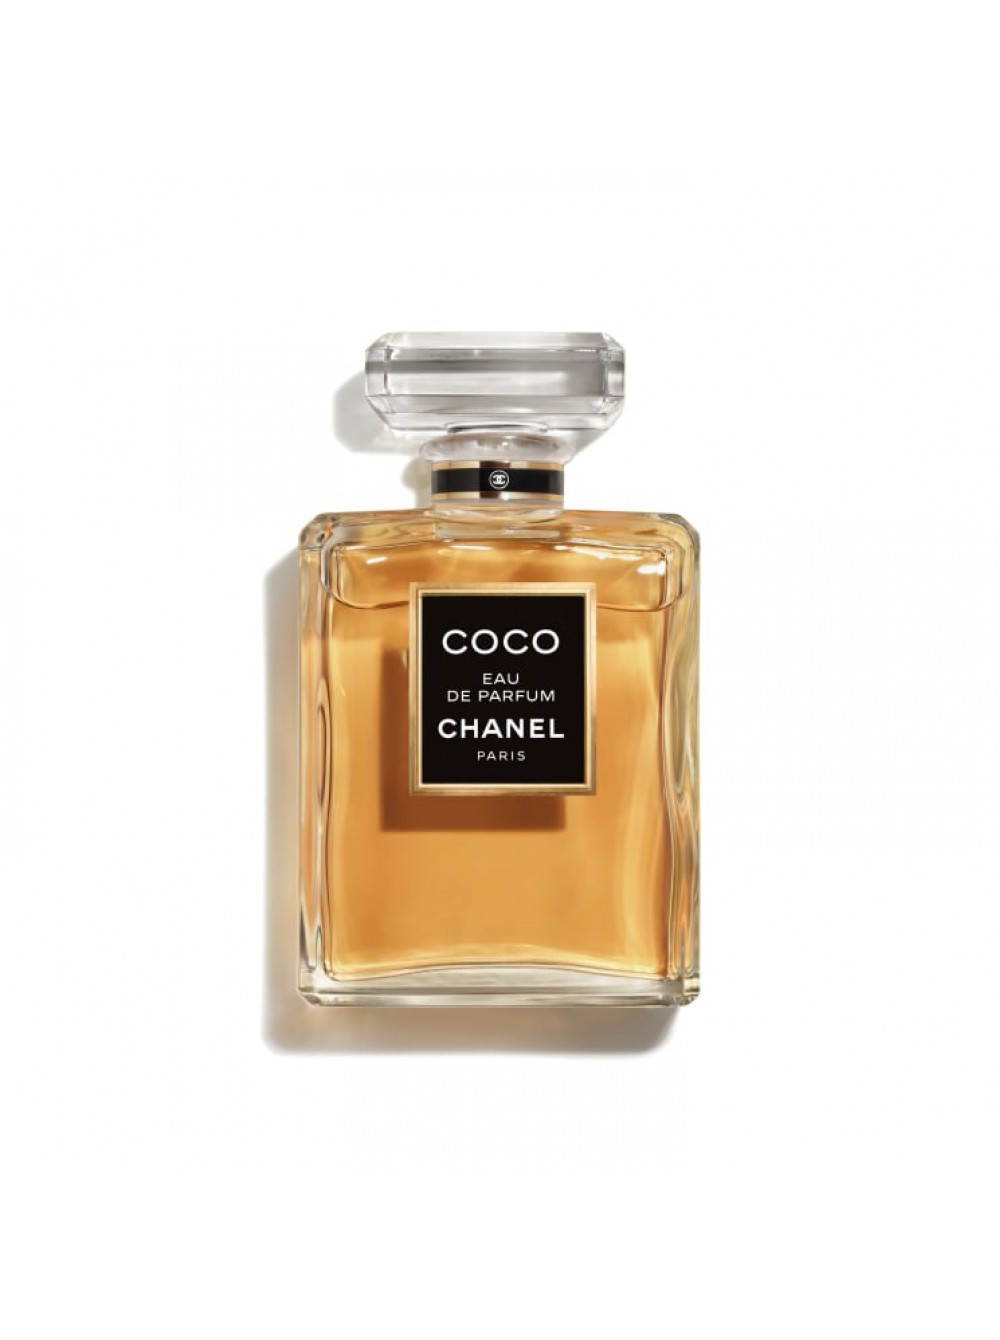 Coco Chanel 100мл. Coco Chanel духи женские. Coco Chanel/парфюмерная вода 100 мл. Chanel Coco EDP 100ml (l).